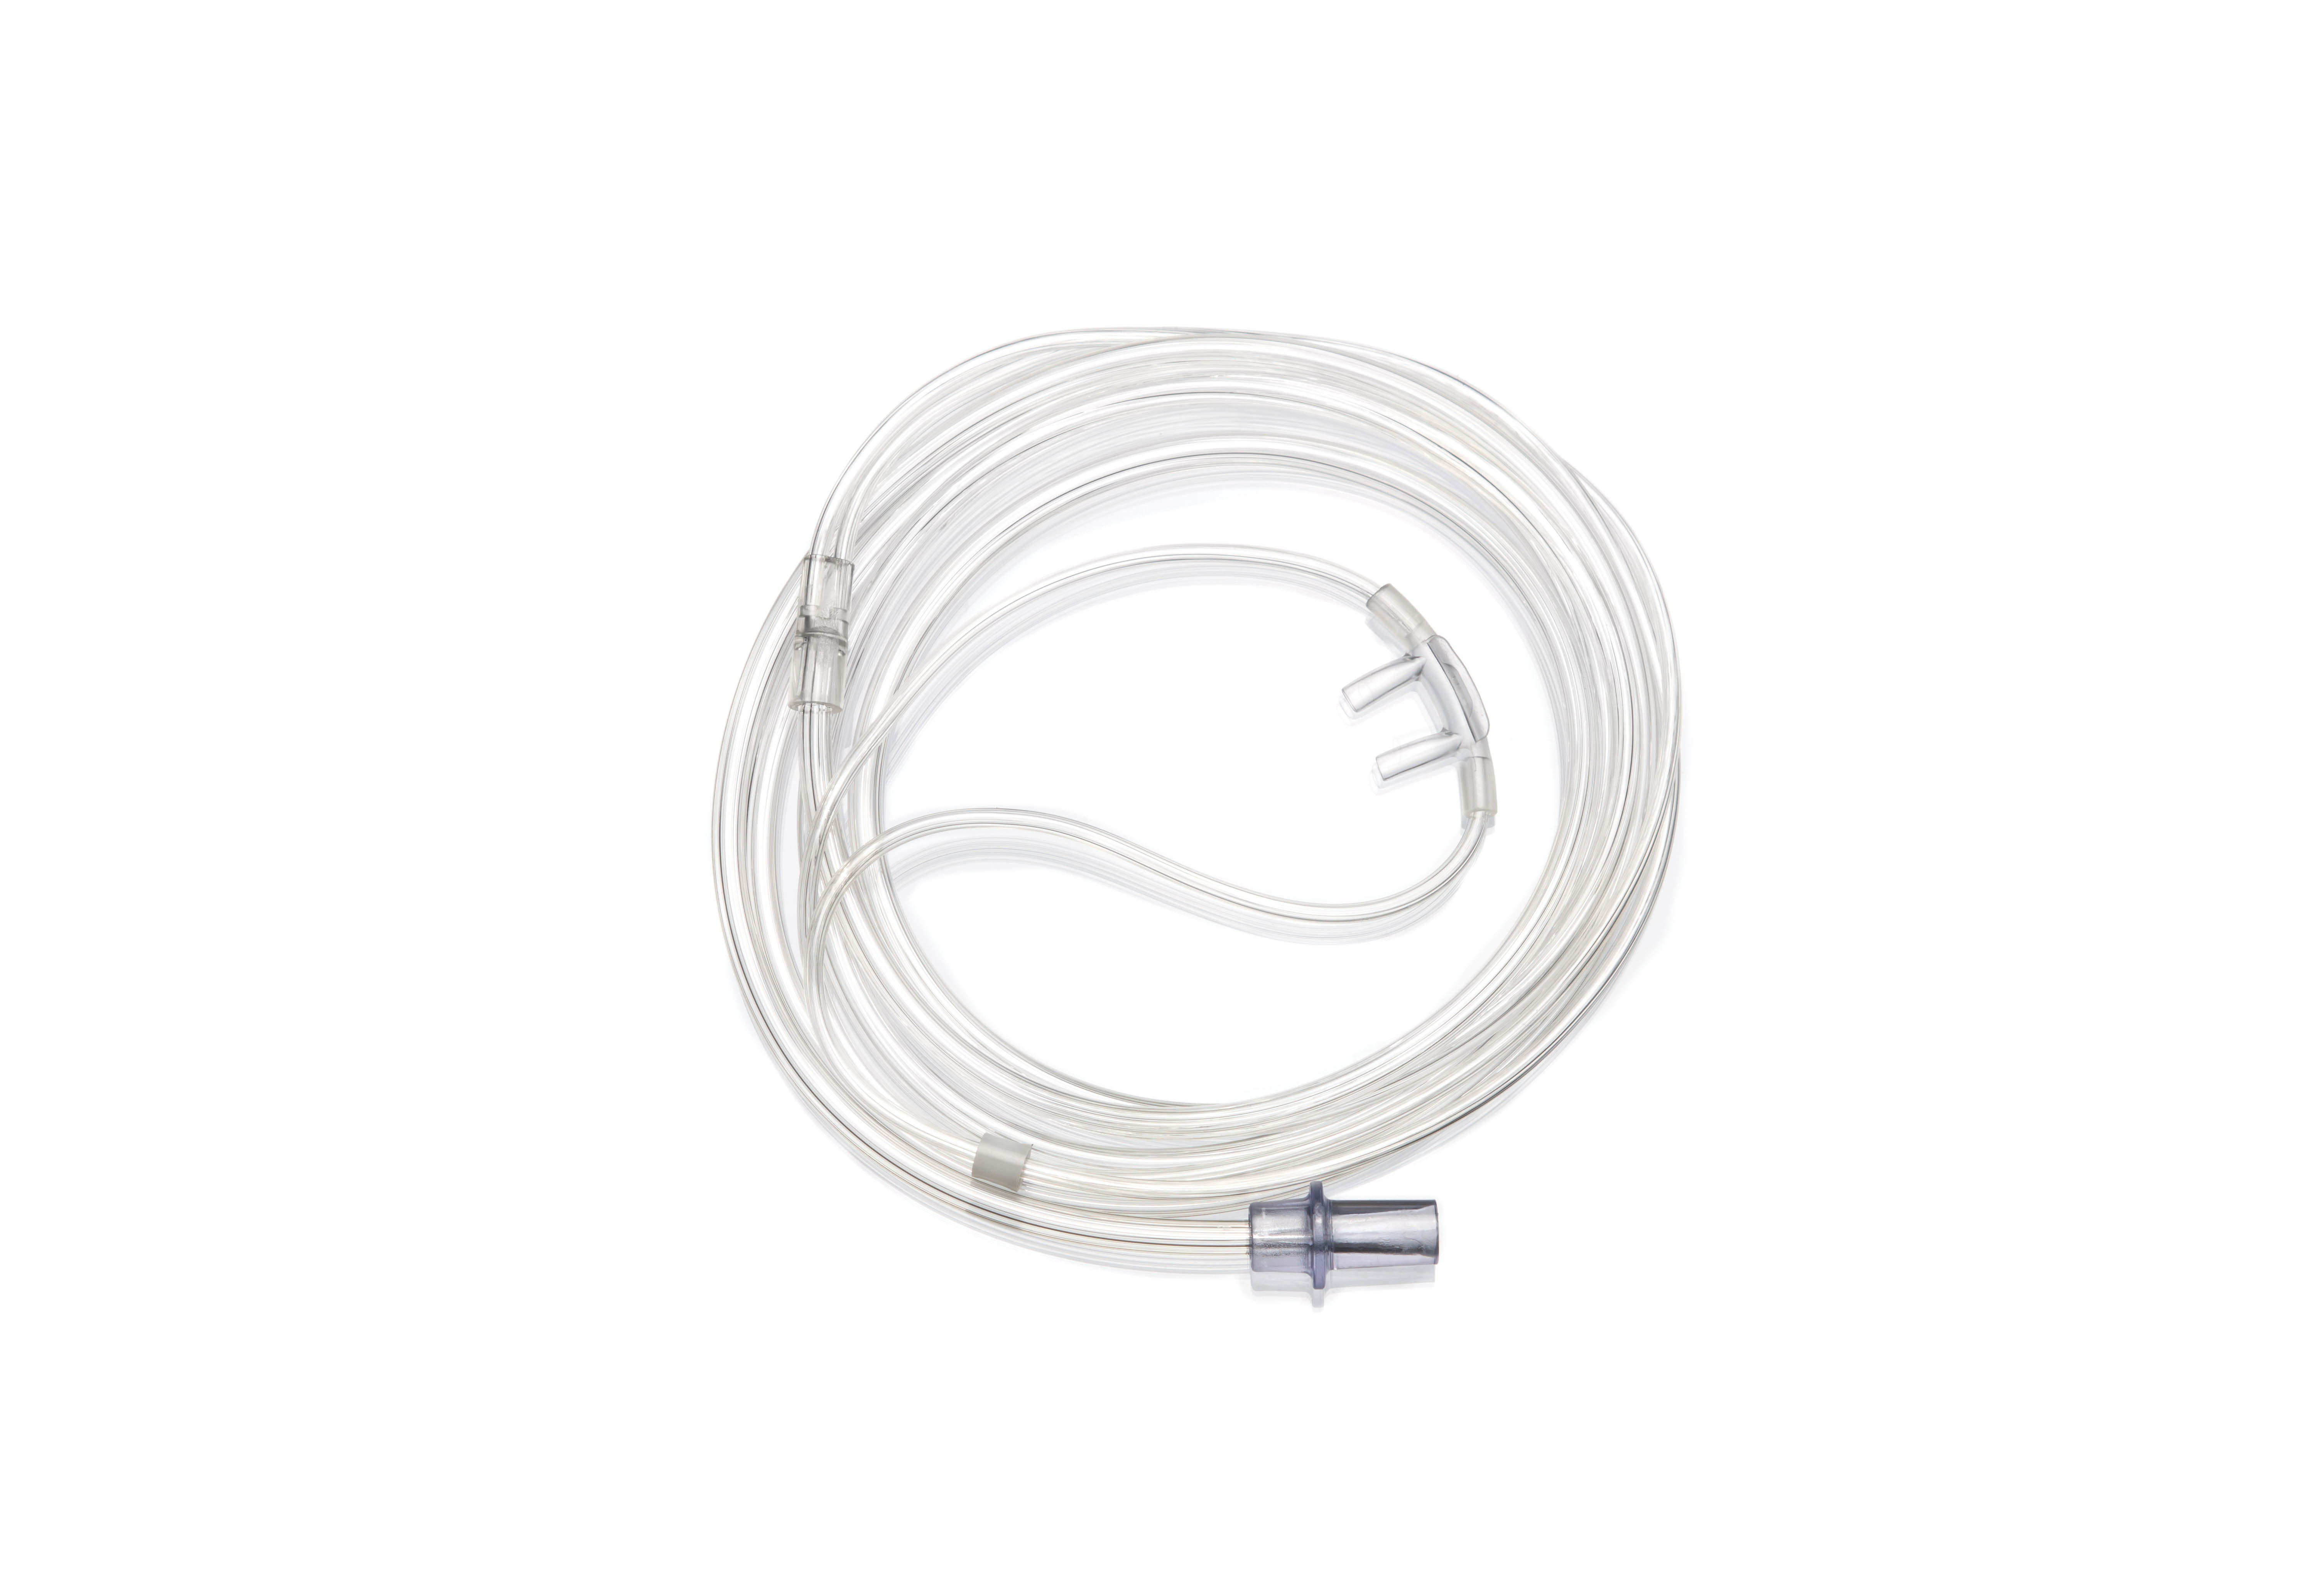 Adult, nasal cannula with straight prongs and tube, 2.1m